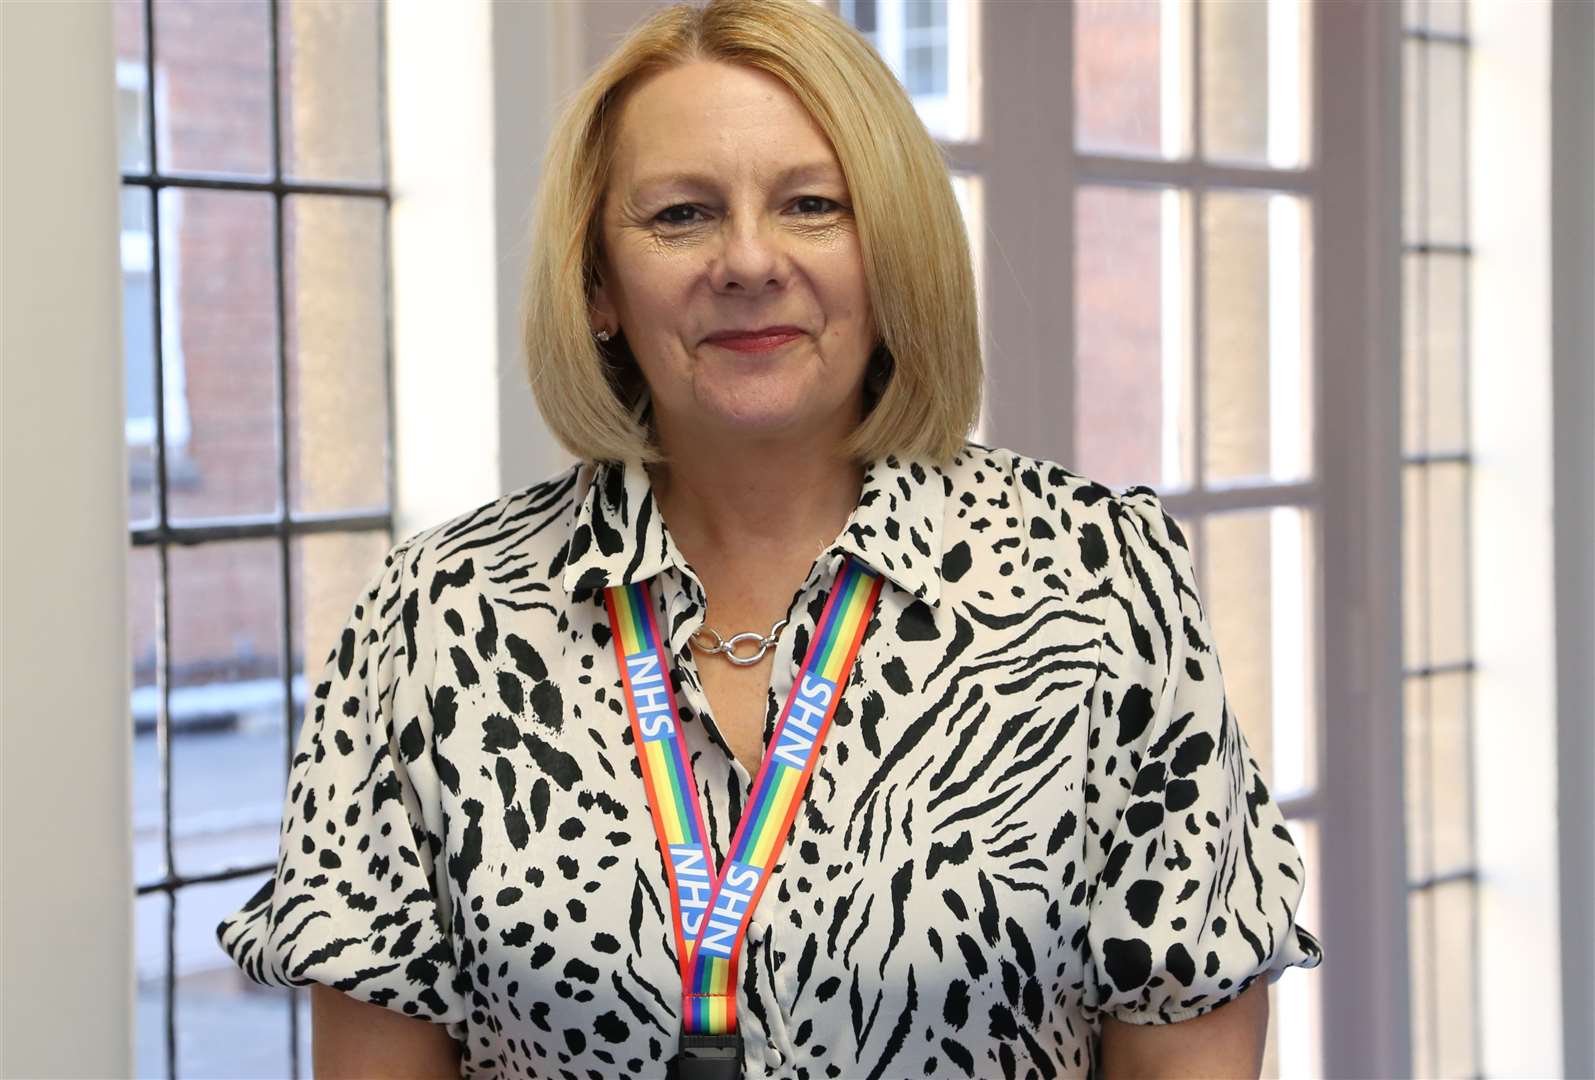 Jayne Black, chief executive of Medway NHS Foundation Trust